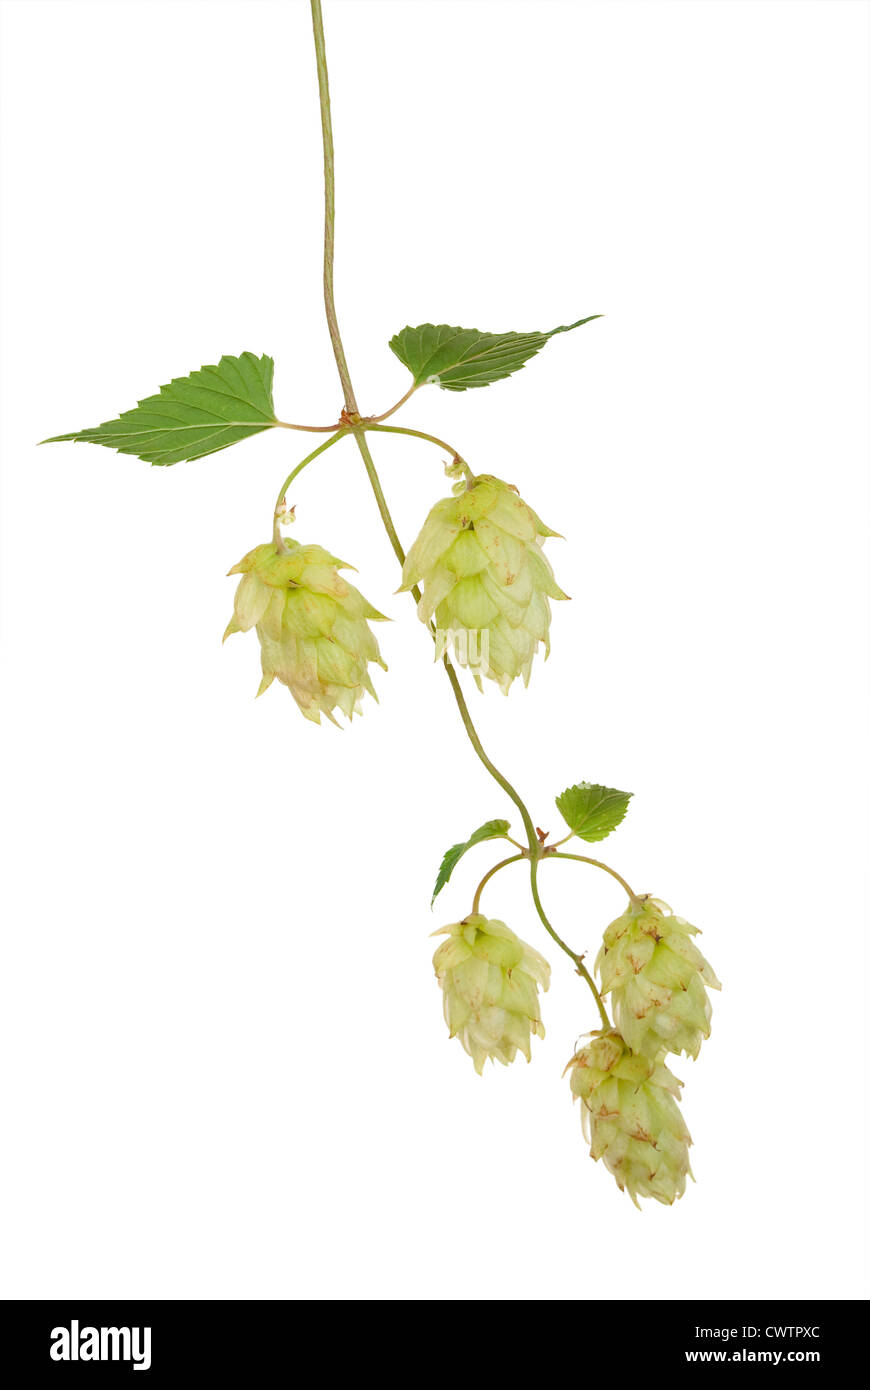 Branch of hops Stock Photo